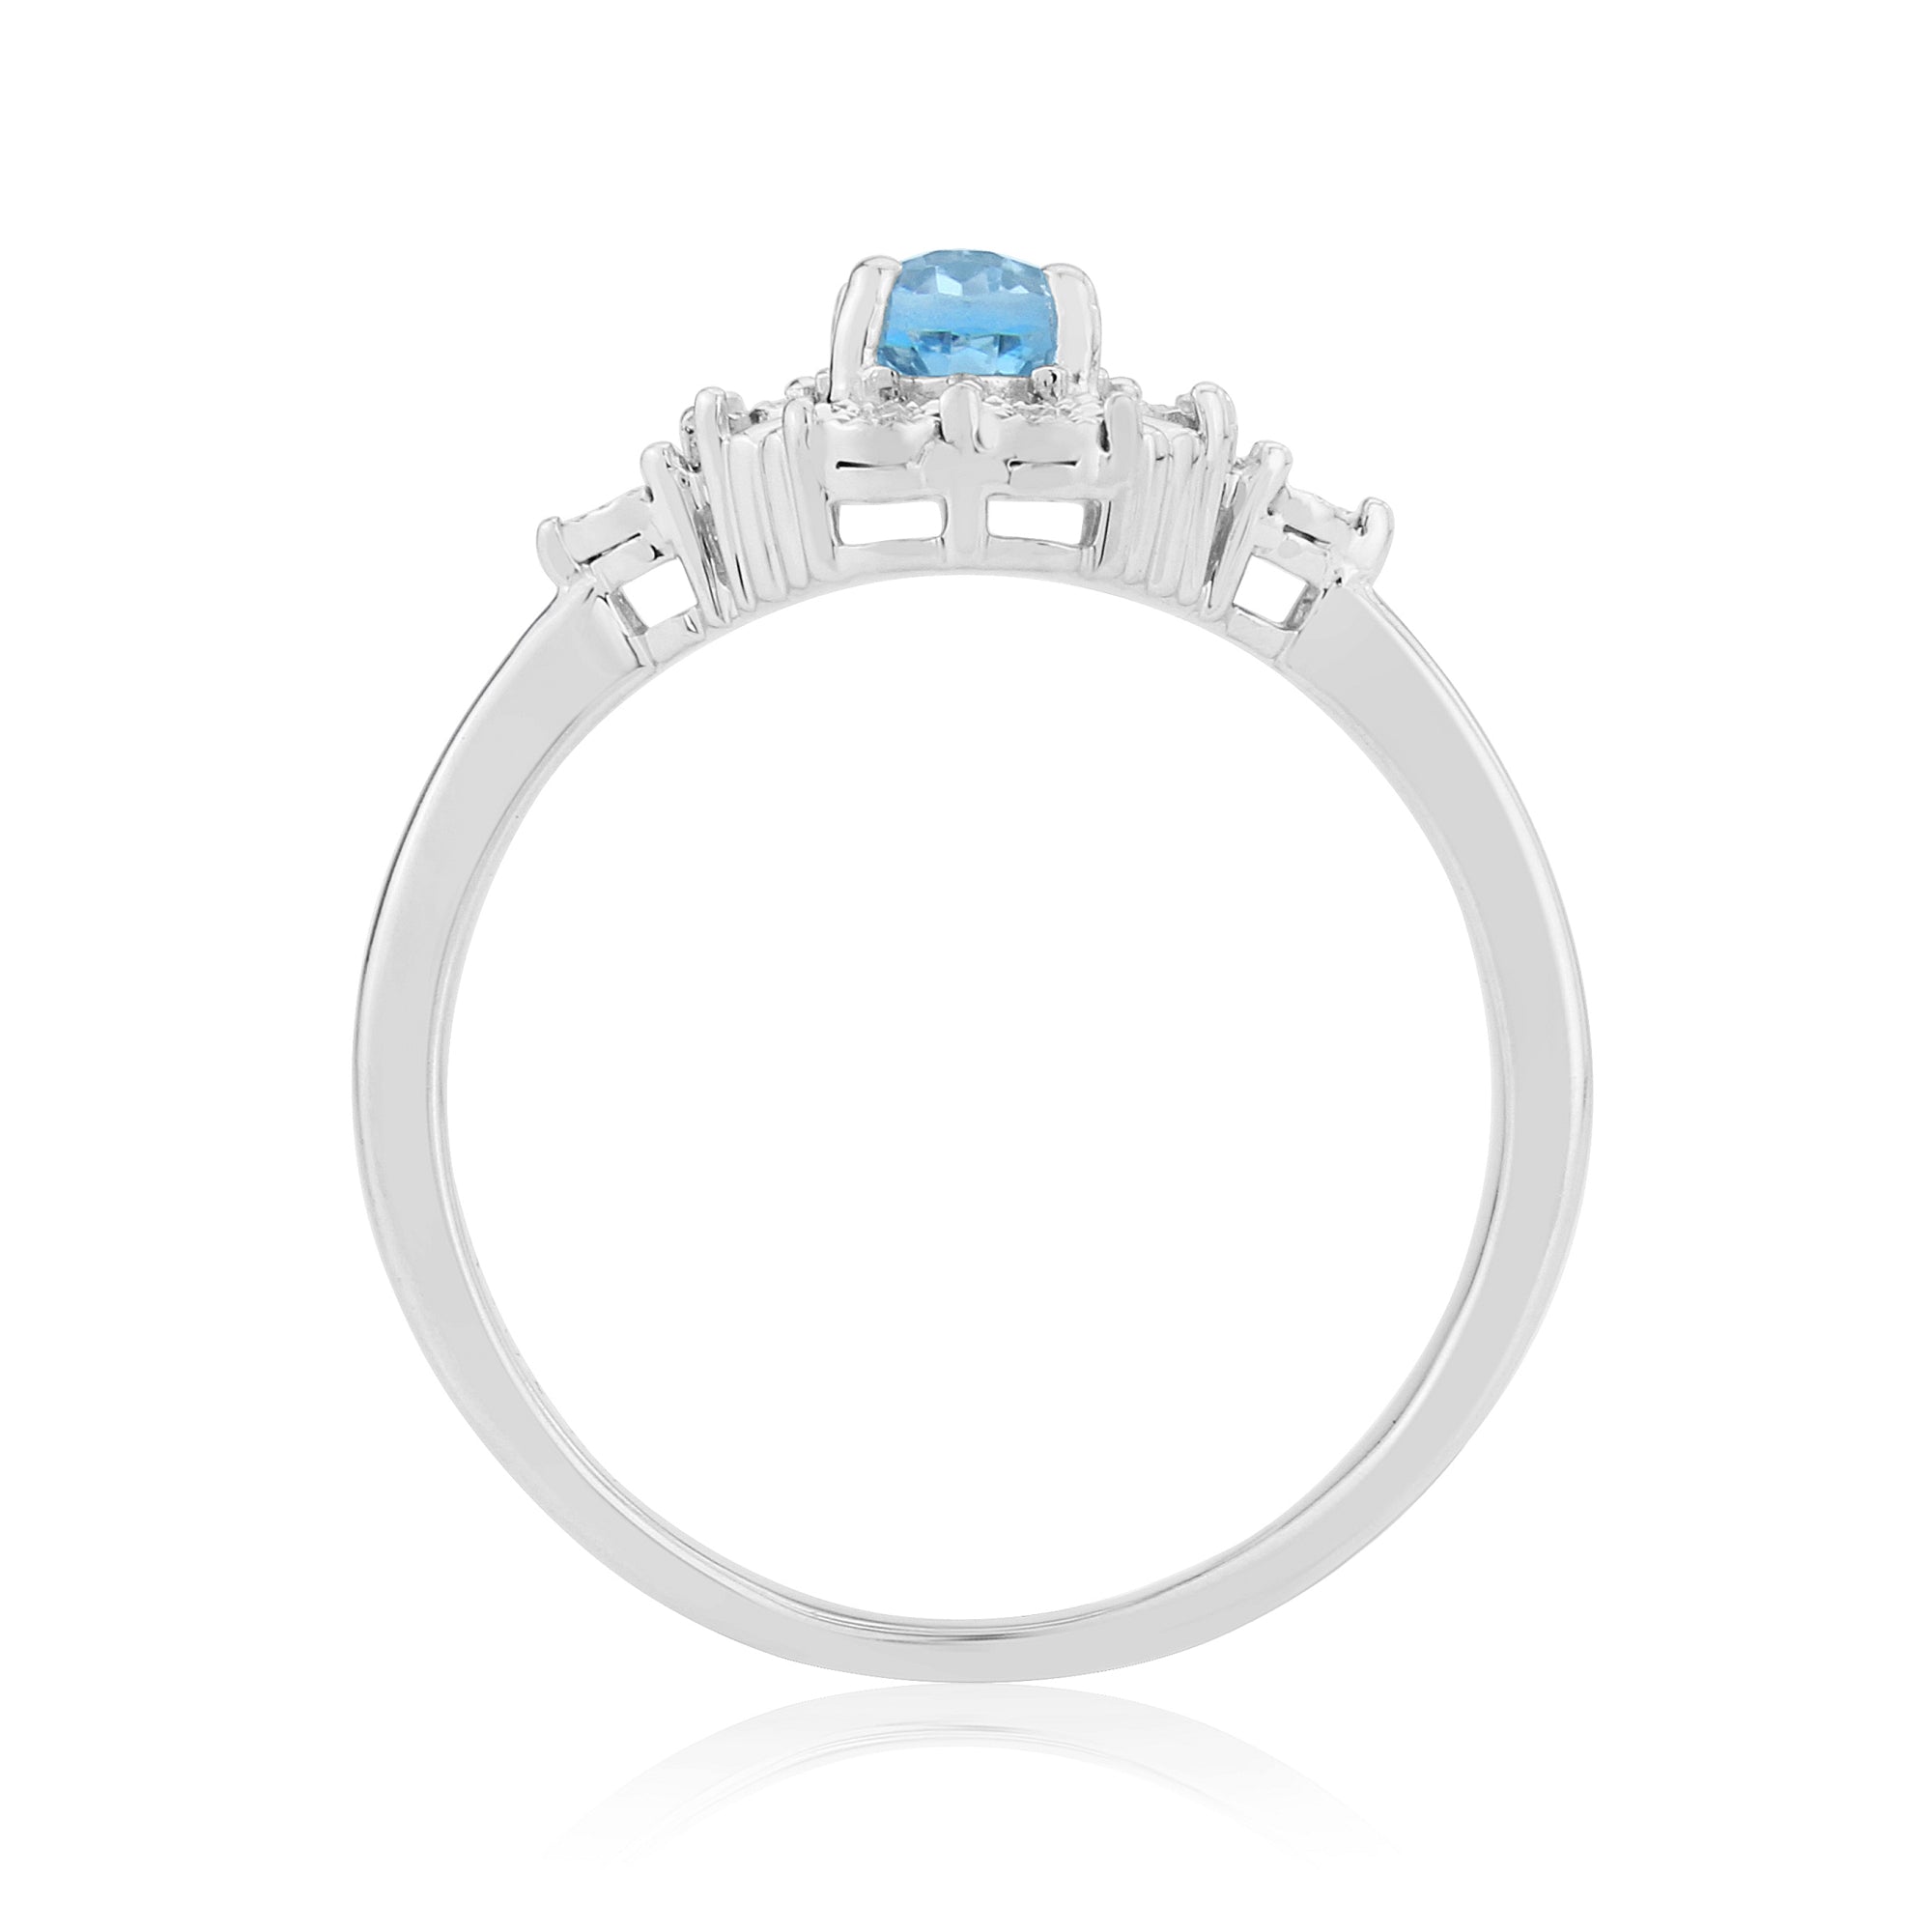 9ct white gold 6x4mm oval blue topaz & miracle plate diamond cluster ring 0.03ct